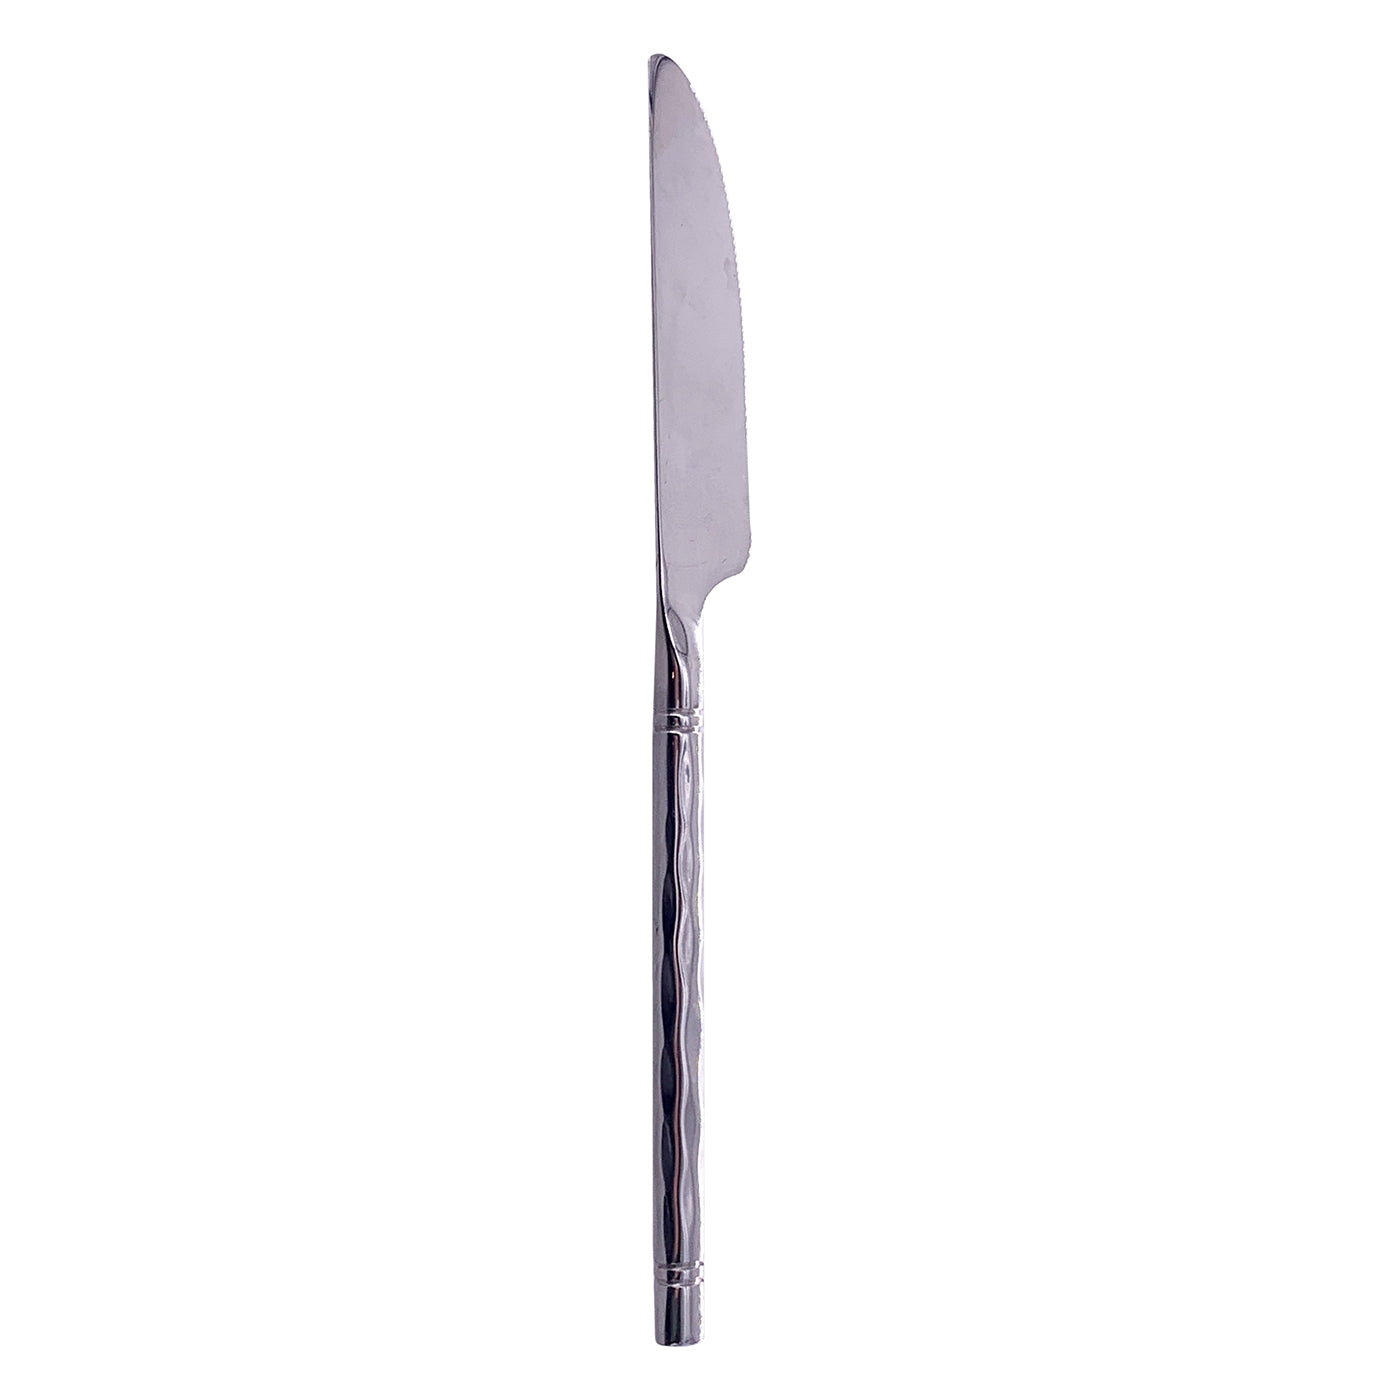 Refined stainless steel knife